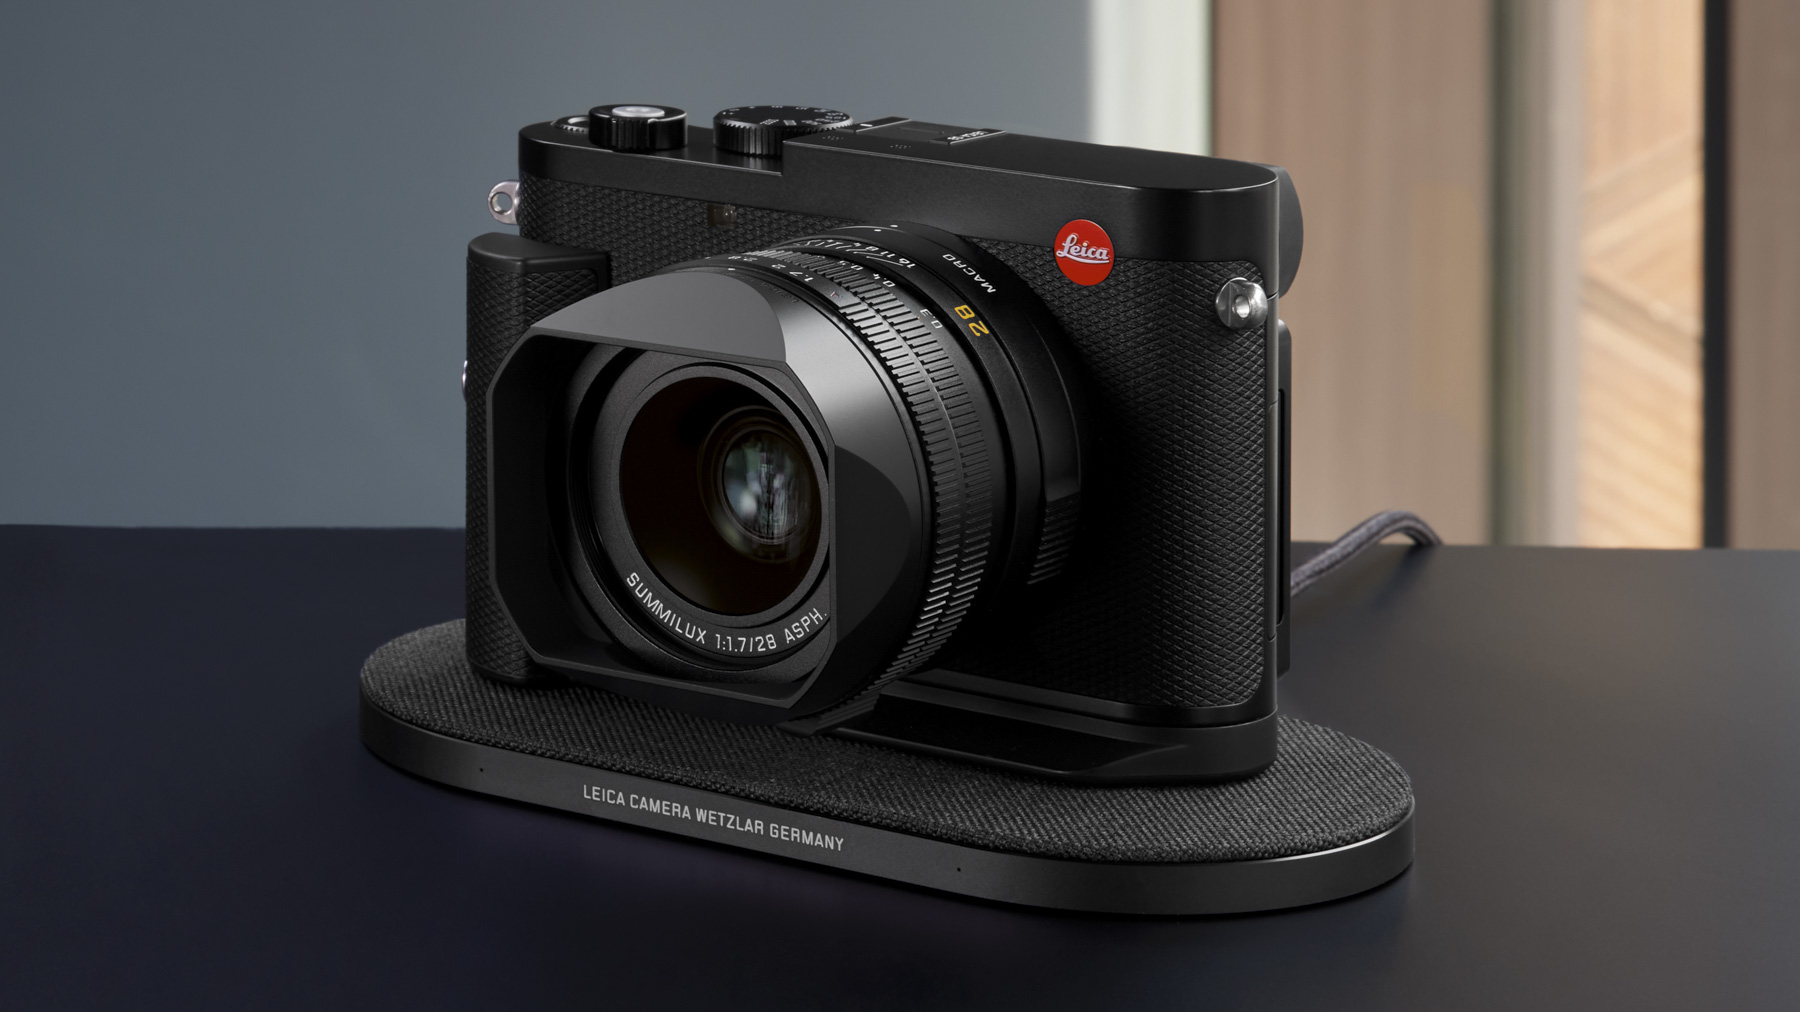 Leica Q3 camera on a wireless charging dock